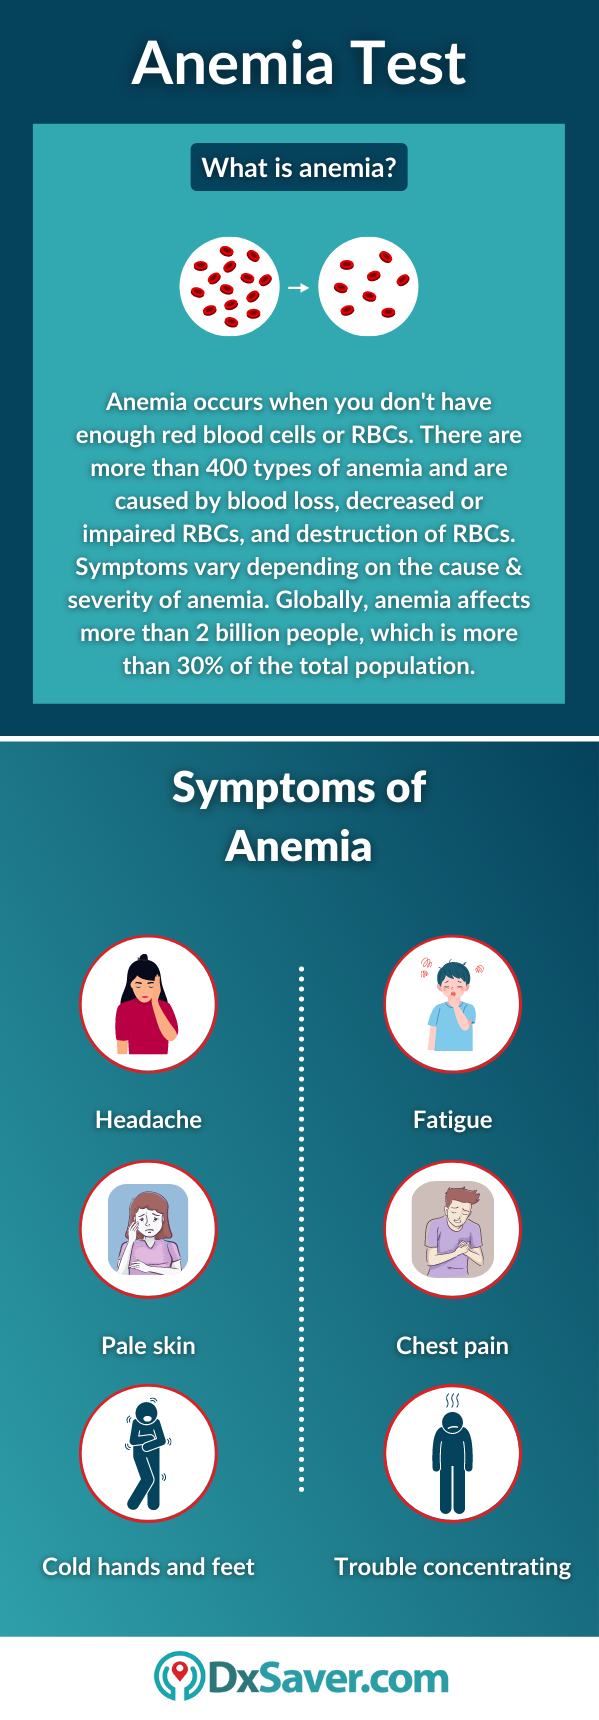 Anemia Test and its Symptoms